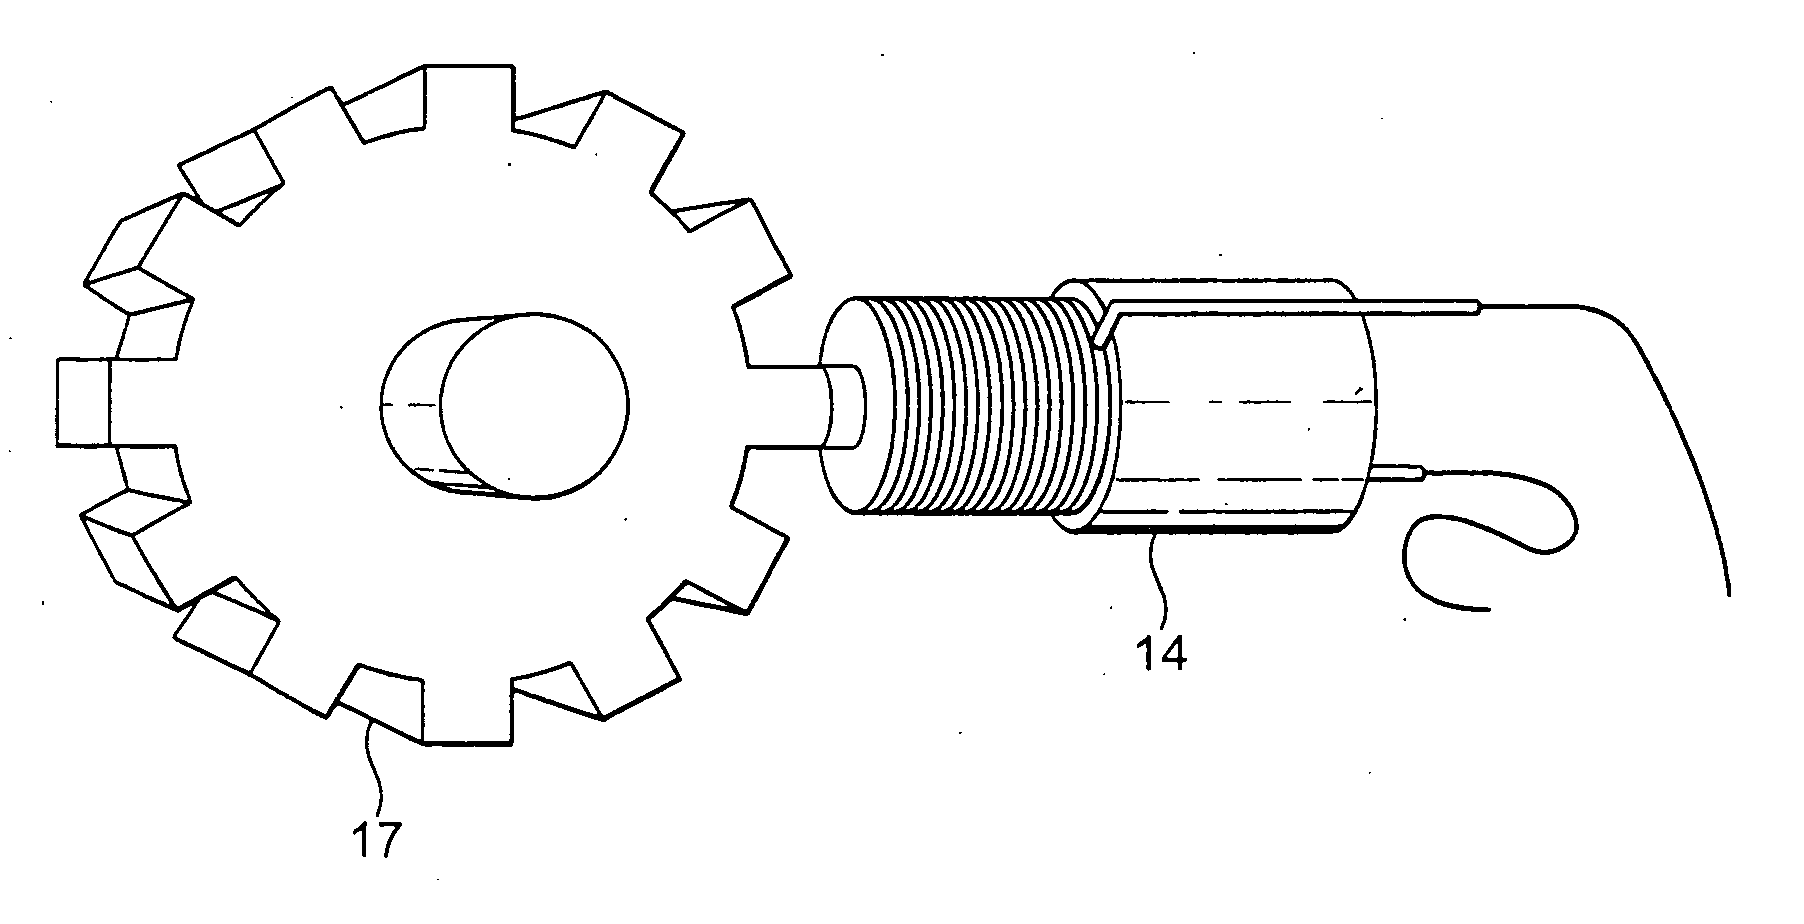 Speed or torque probe for gas turbine engines